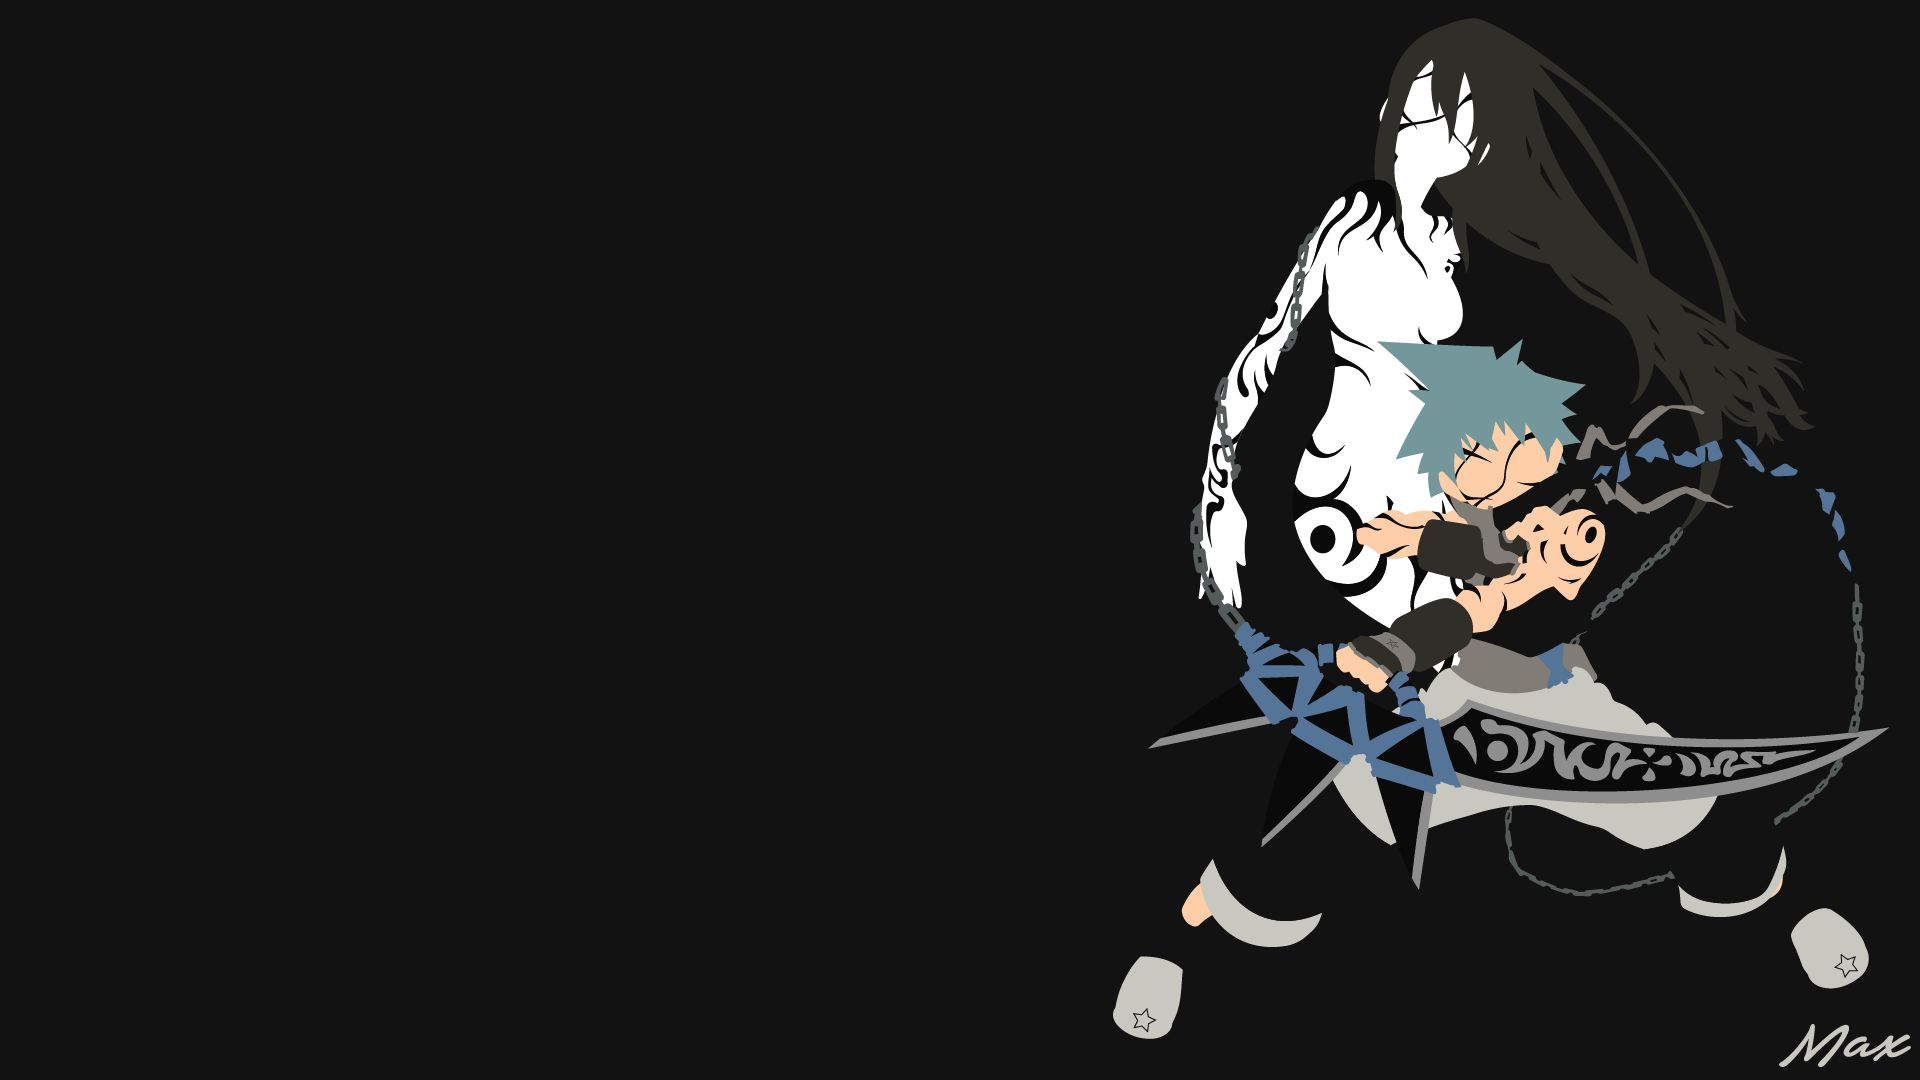 4577910 Soul Eater, shinigami - Rare Gallery HD Wallpapers